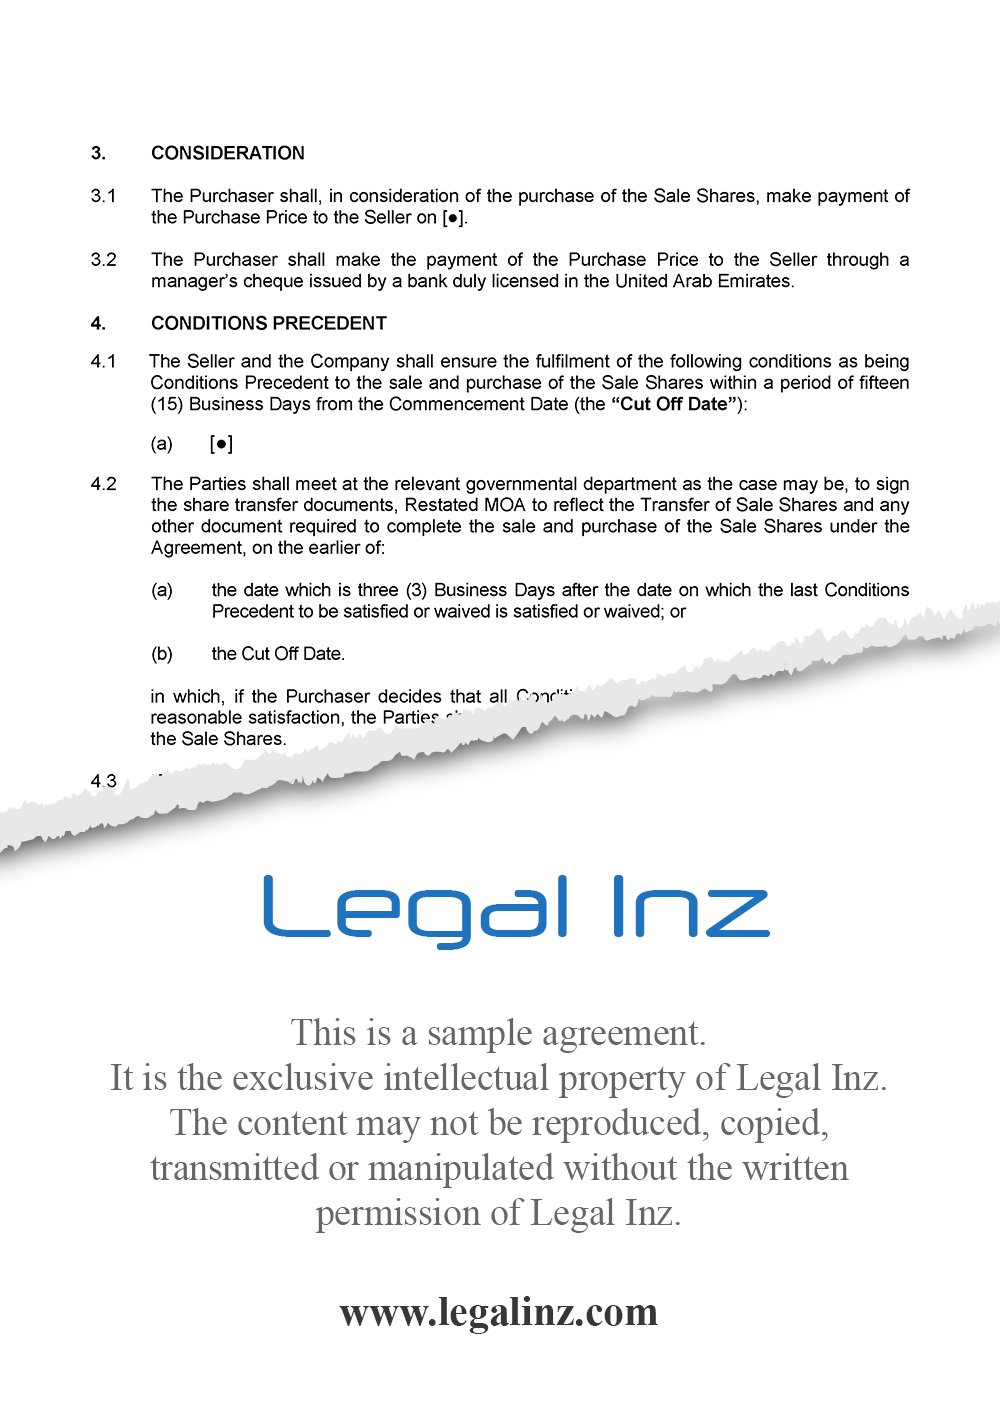 Share Purchase Agreement Sample 5